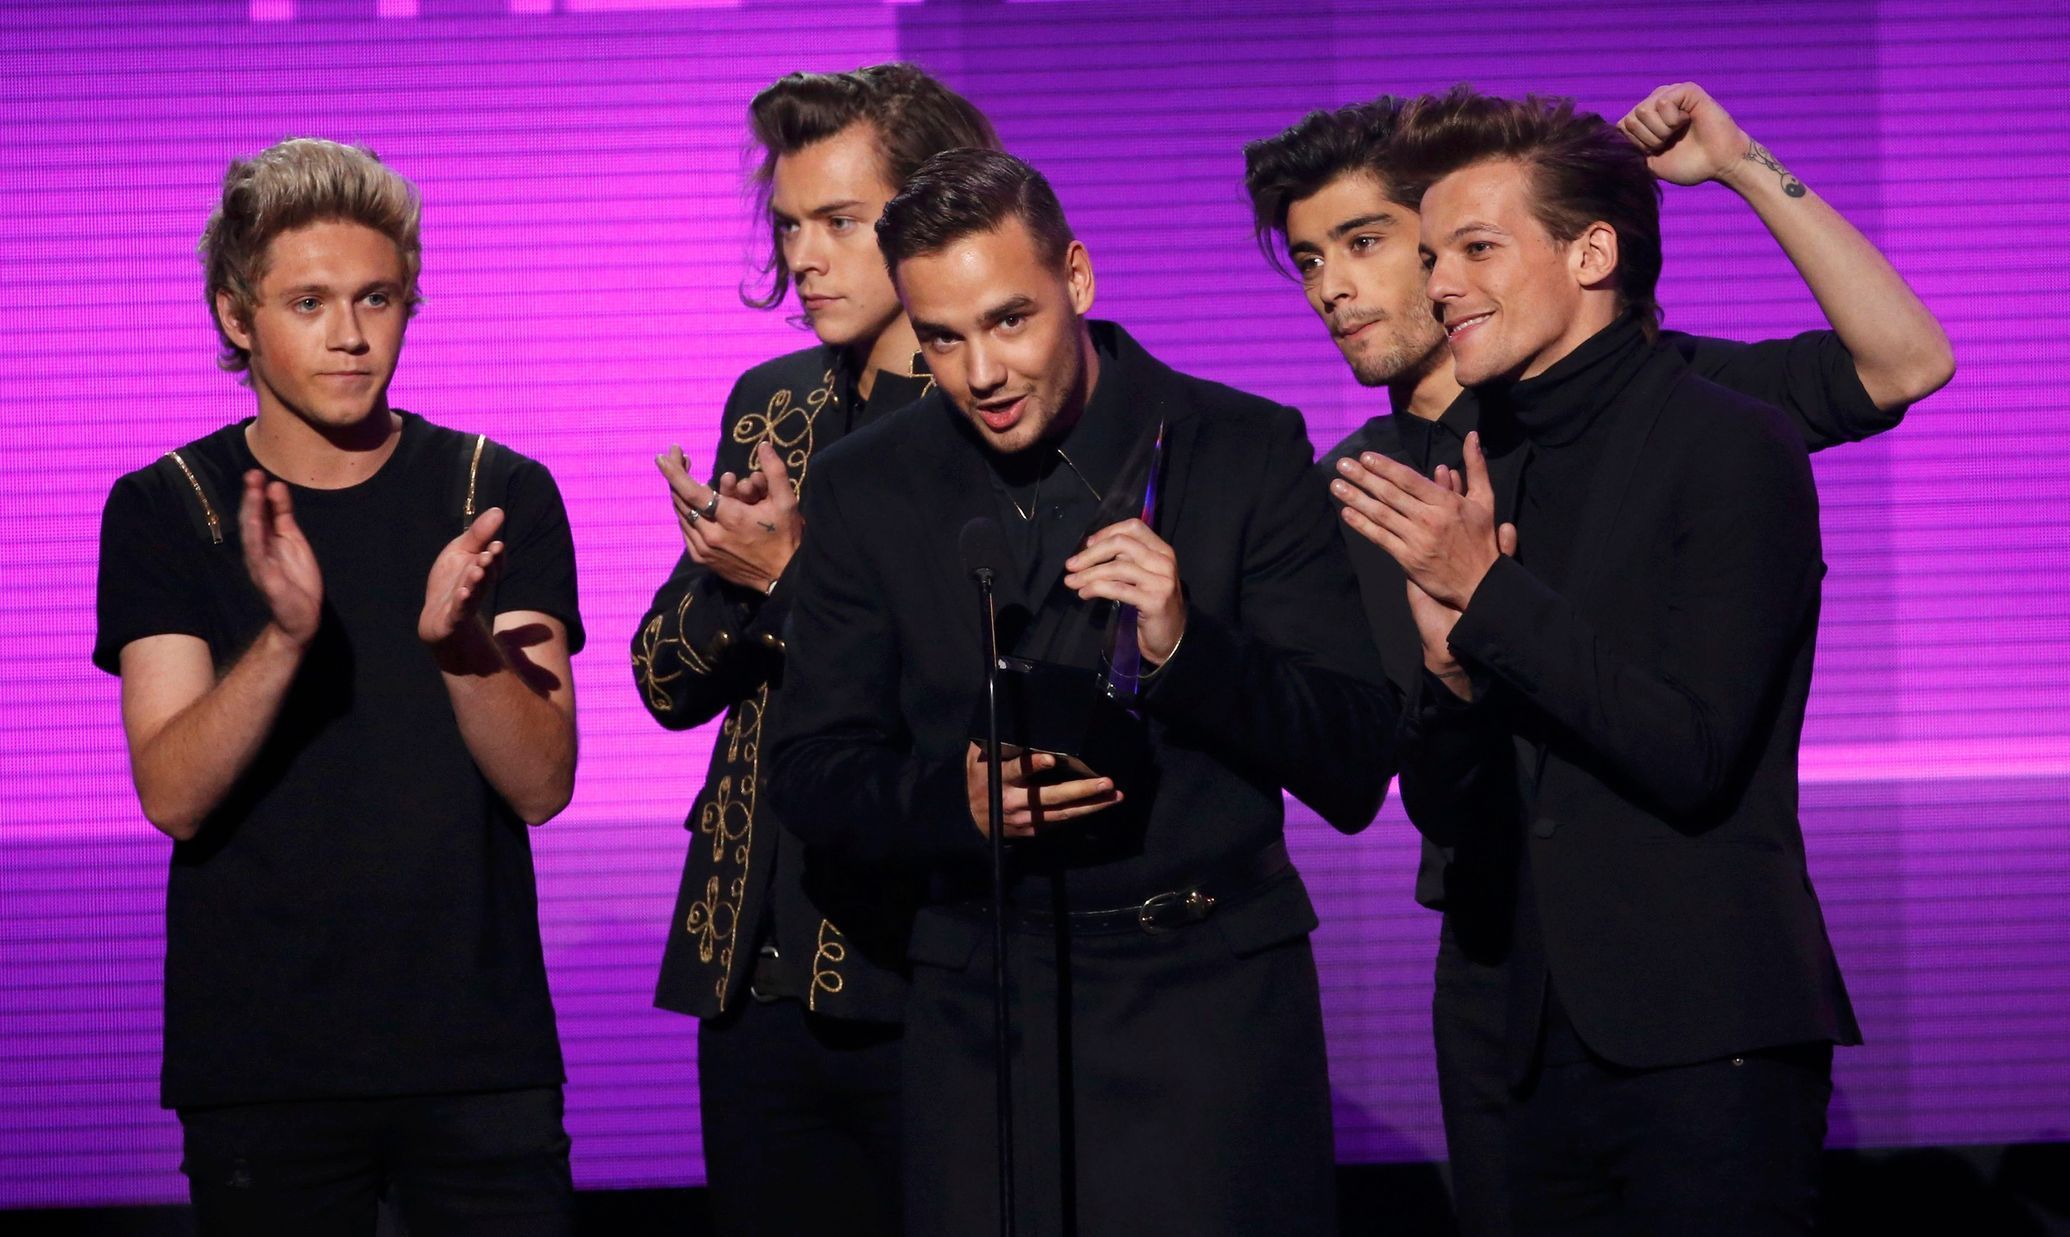 American Music Awards v Los Angeles - One Direction